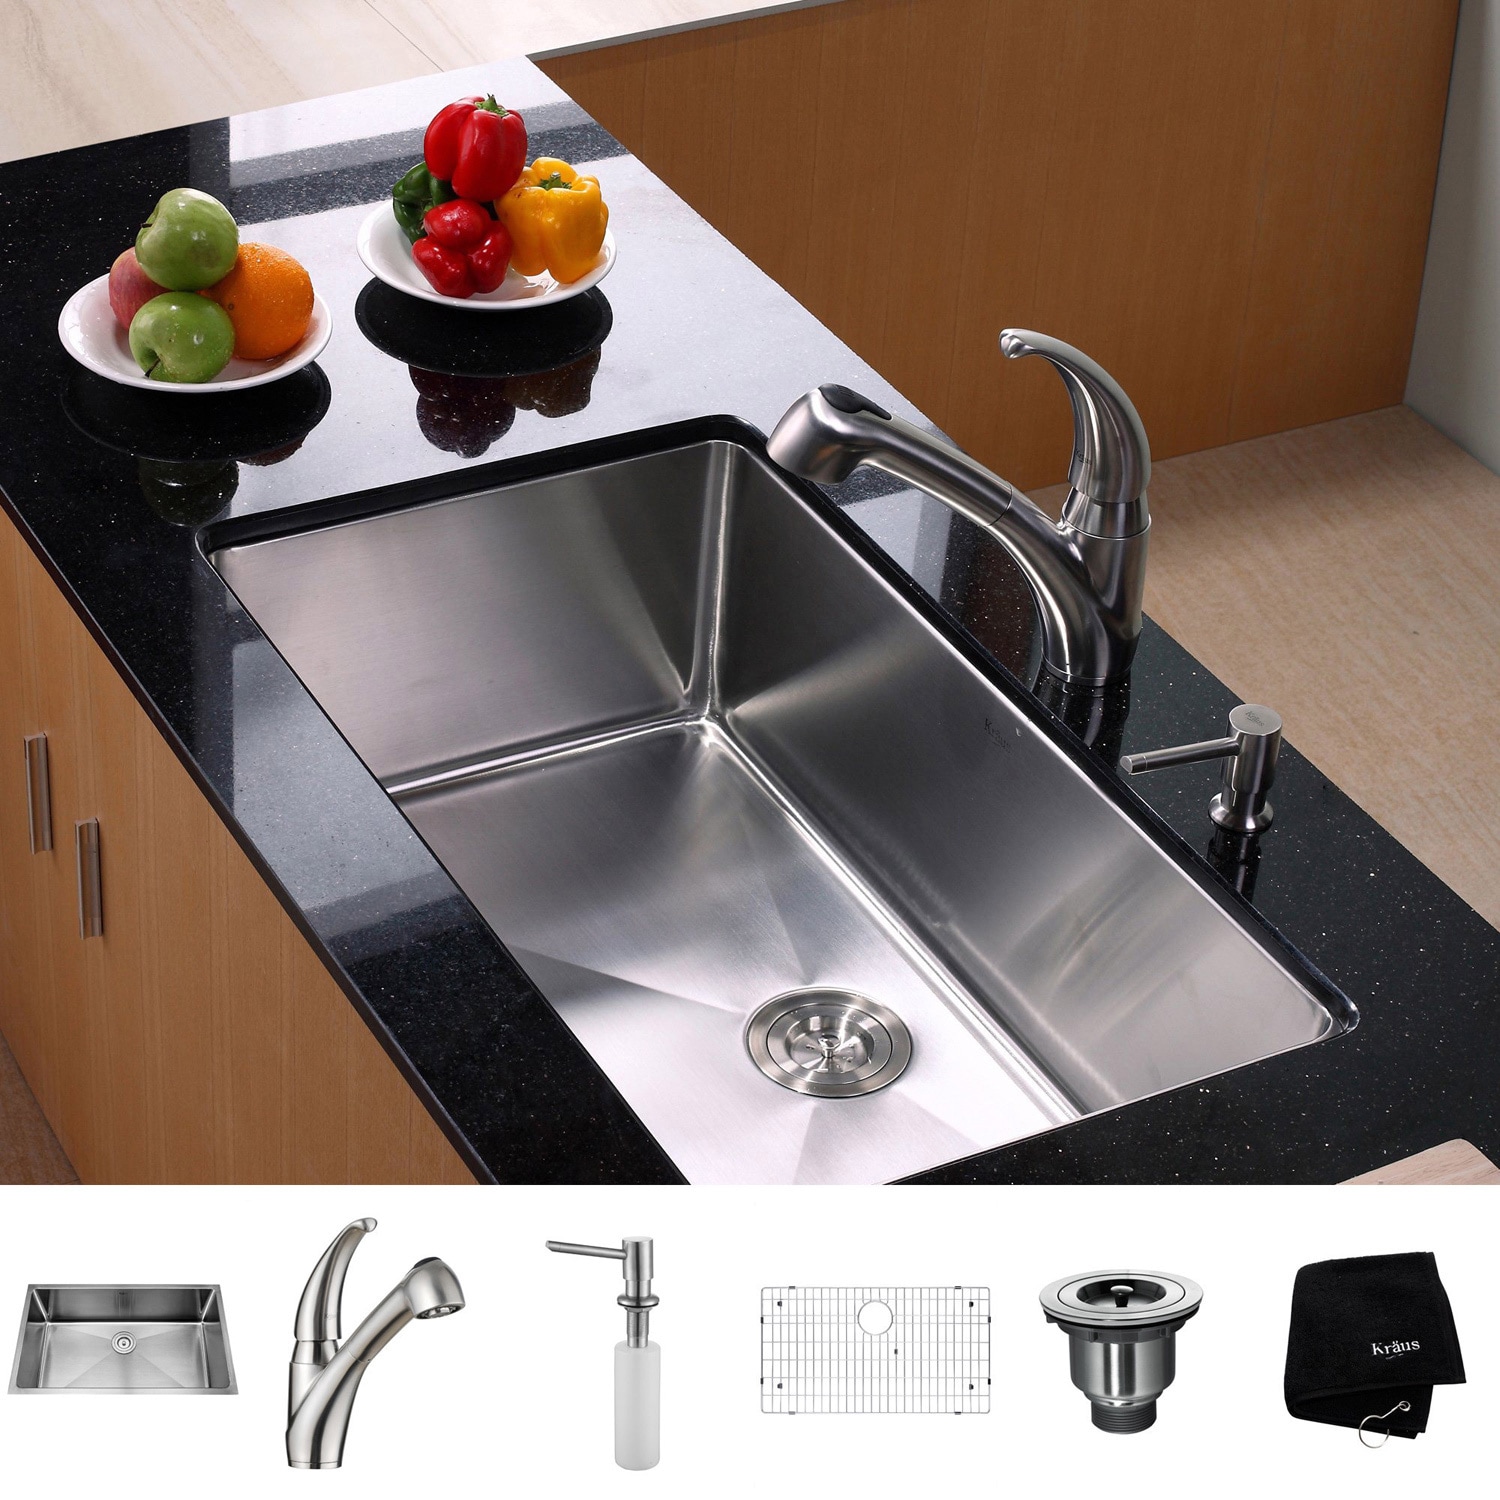 https://ak1.ostkcdn.com/images/products/4370531/Kraus-Kitchen-Combo-Set-Stainless-Steel-30-inch-Undermount-Sink-with-Faucet-ee12a7e4-1154-46c0-ac4a-bb497344442a.jpg